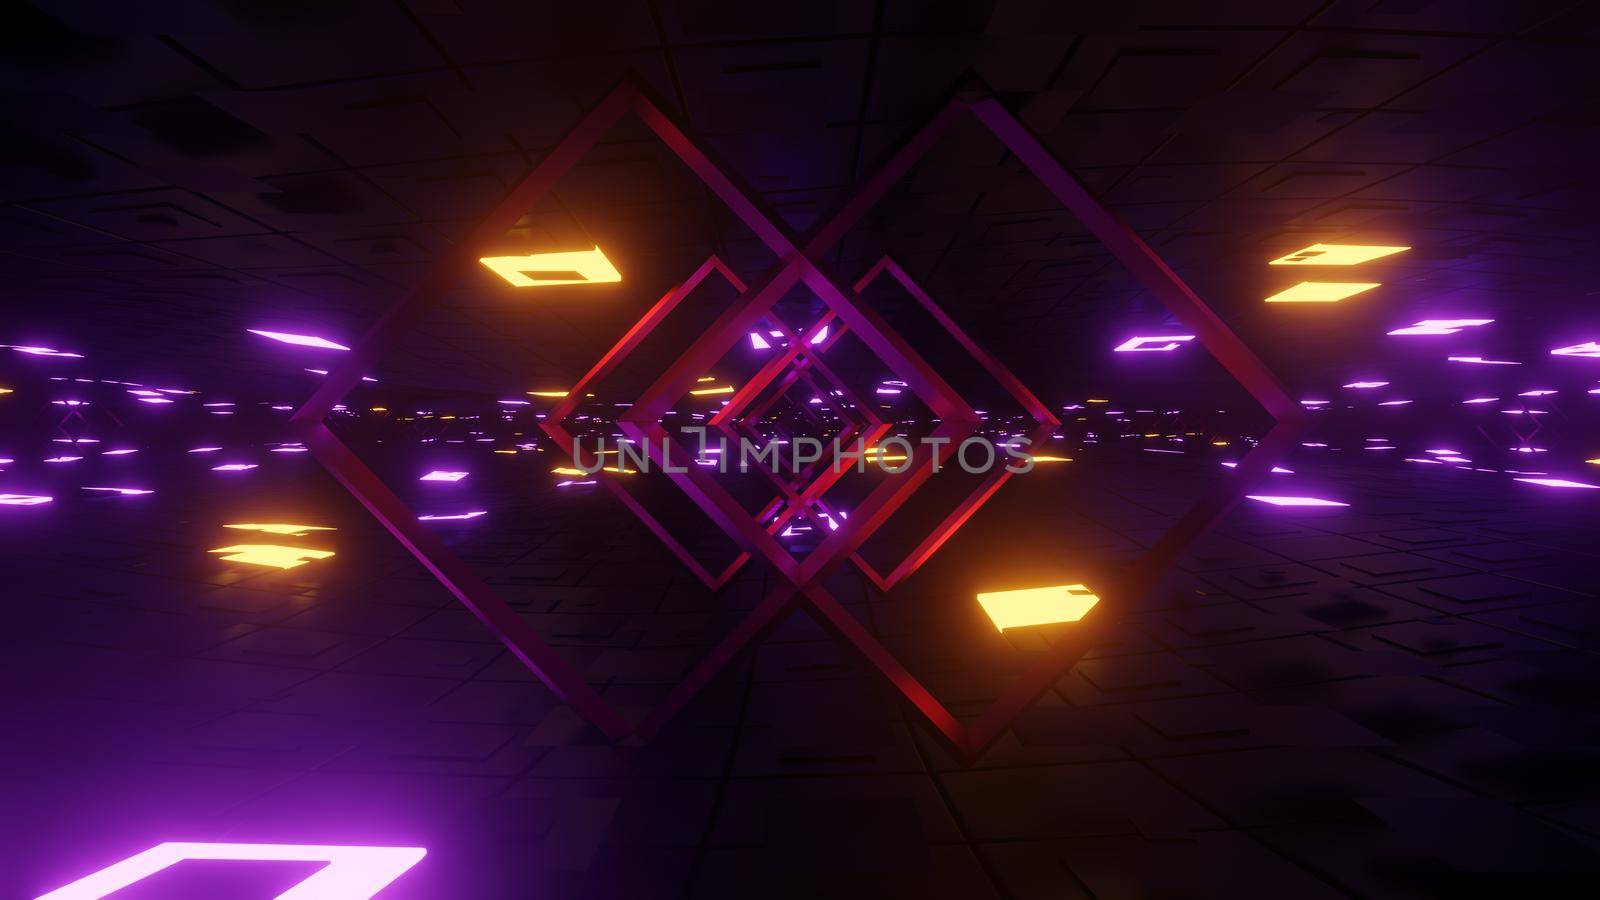 3D illustration Background for advertising and wallpaper in 80s retro and sci fi pop art scene. 3D rendering in decorative concept.